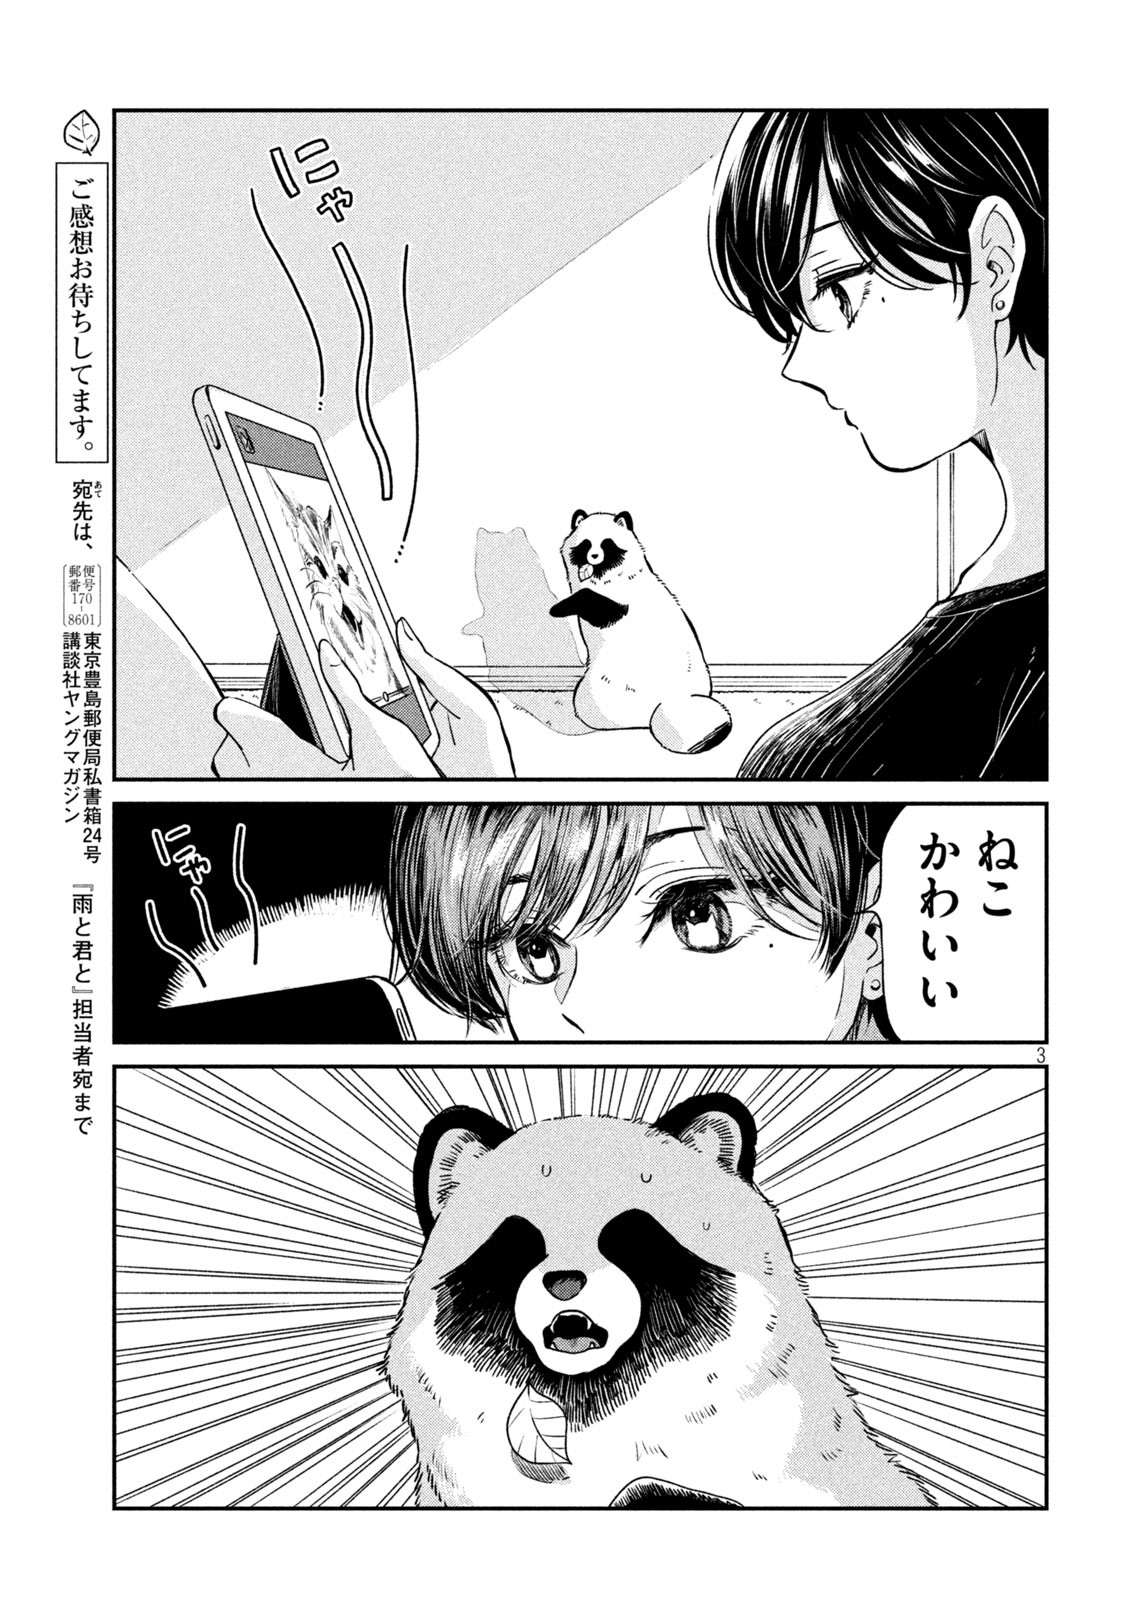 Ame to Kimi to - Chapter 93 - Page 3